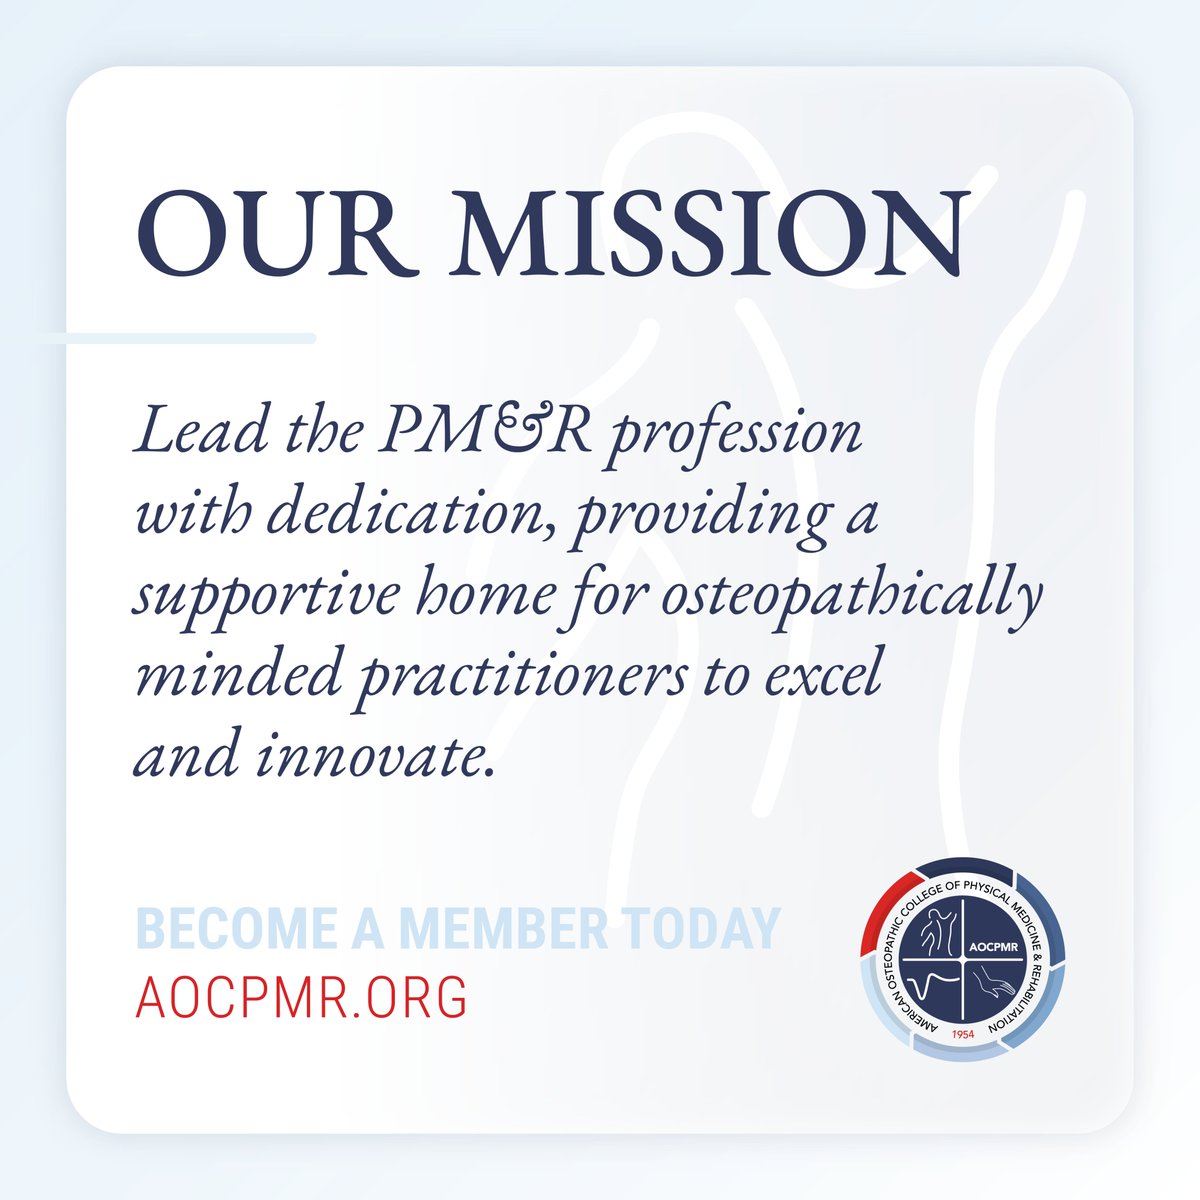 Our mission is to lead the PM&R profession with dedication, providing a supportive home for osteopathic practitioners to excel and innovate. Become a member today by visiting aocpmr.org/about/join/.